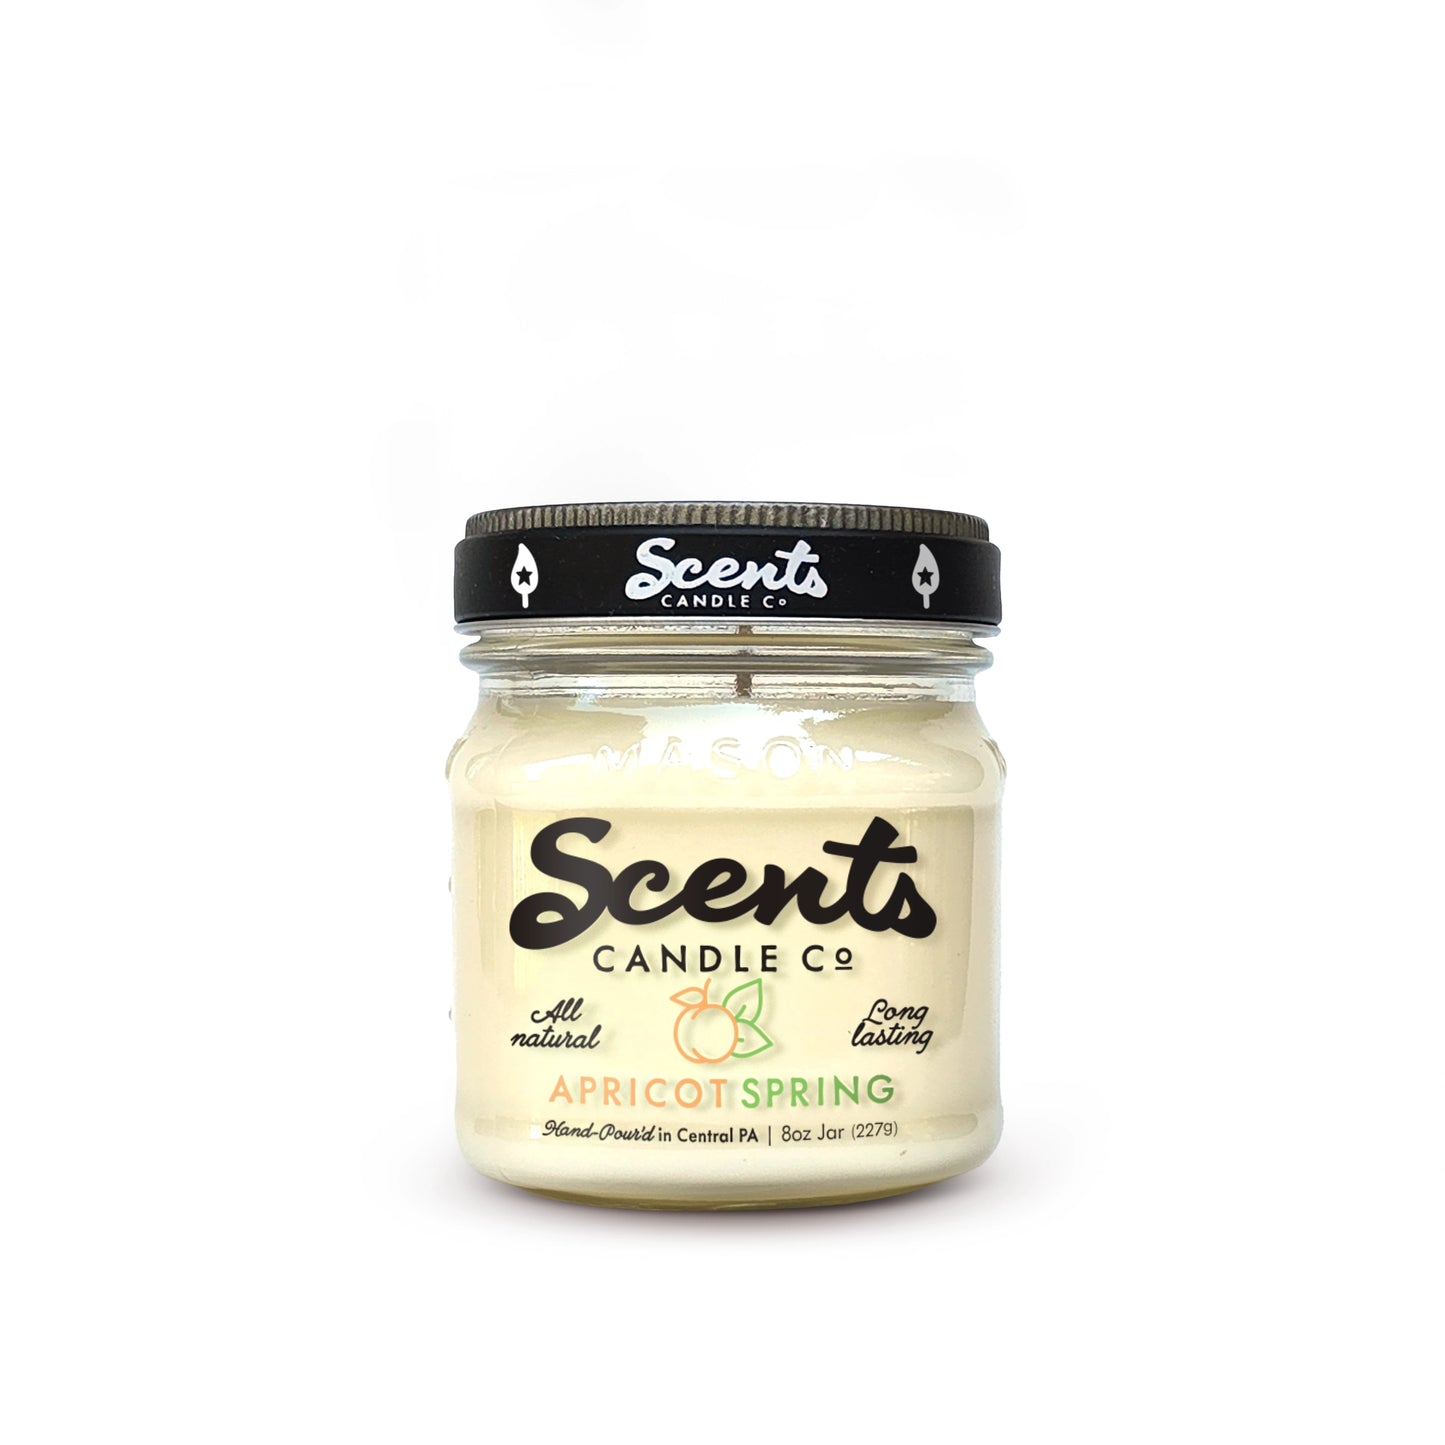 Scents Candle Co. Apricot Spring Soy Wax Candles